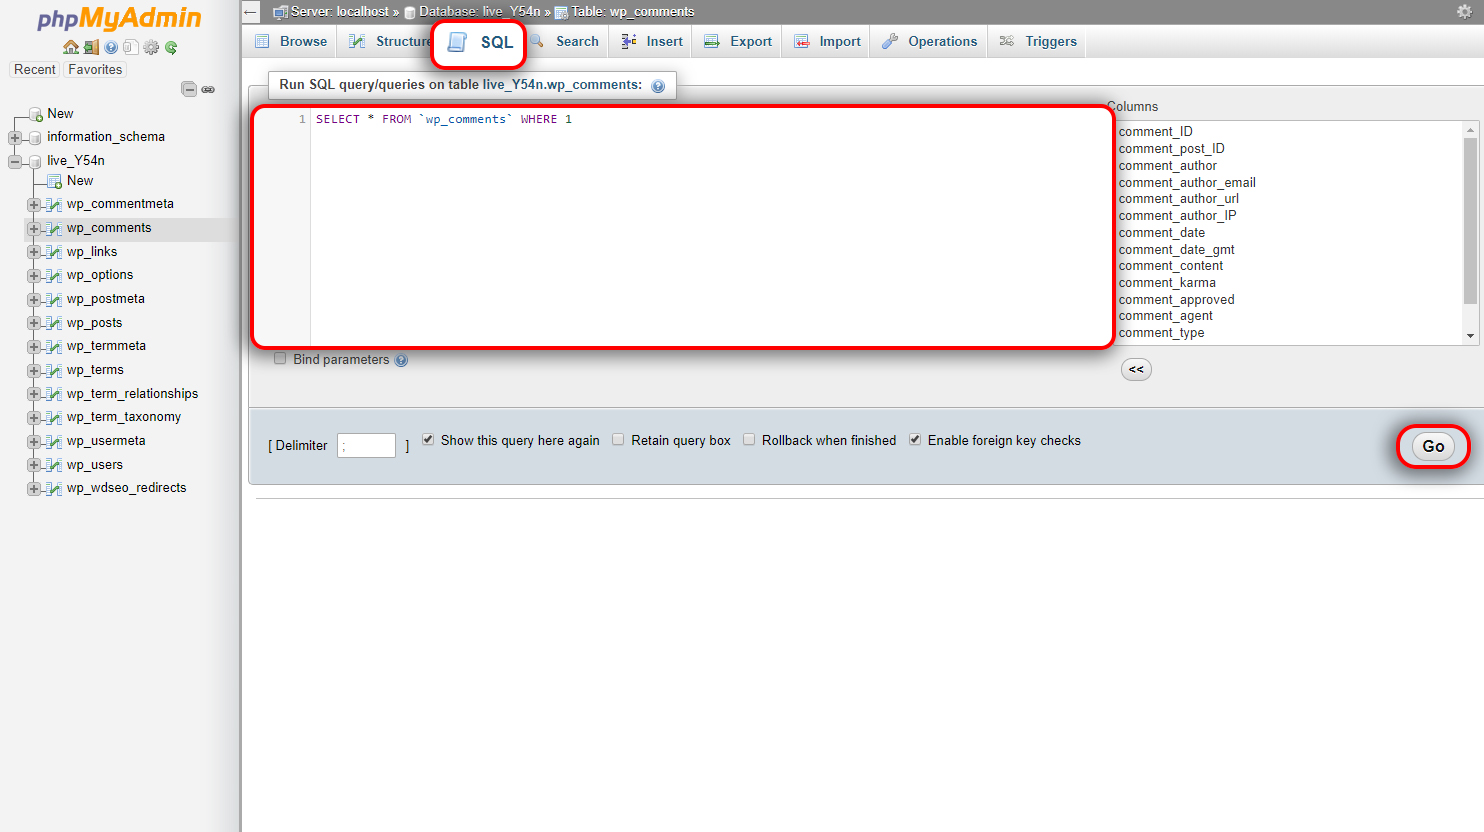 How_to_Run_a_Query_in_phpMyAdmin_4.jpg